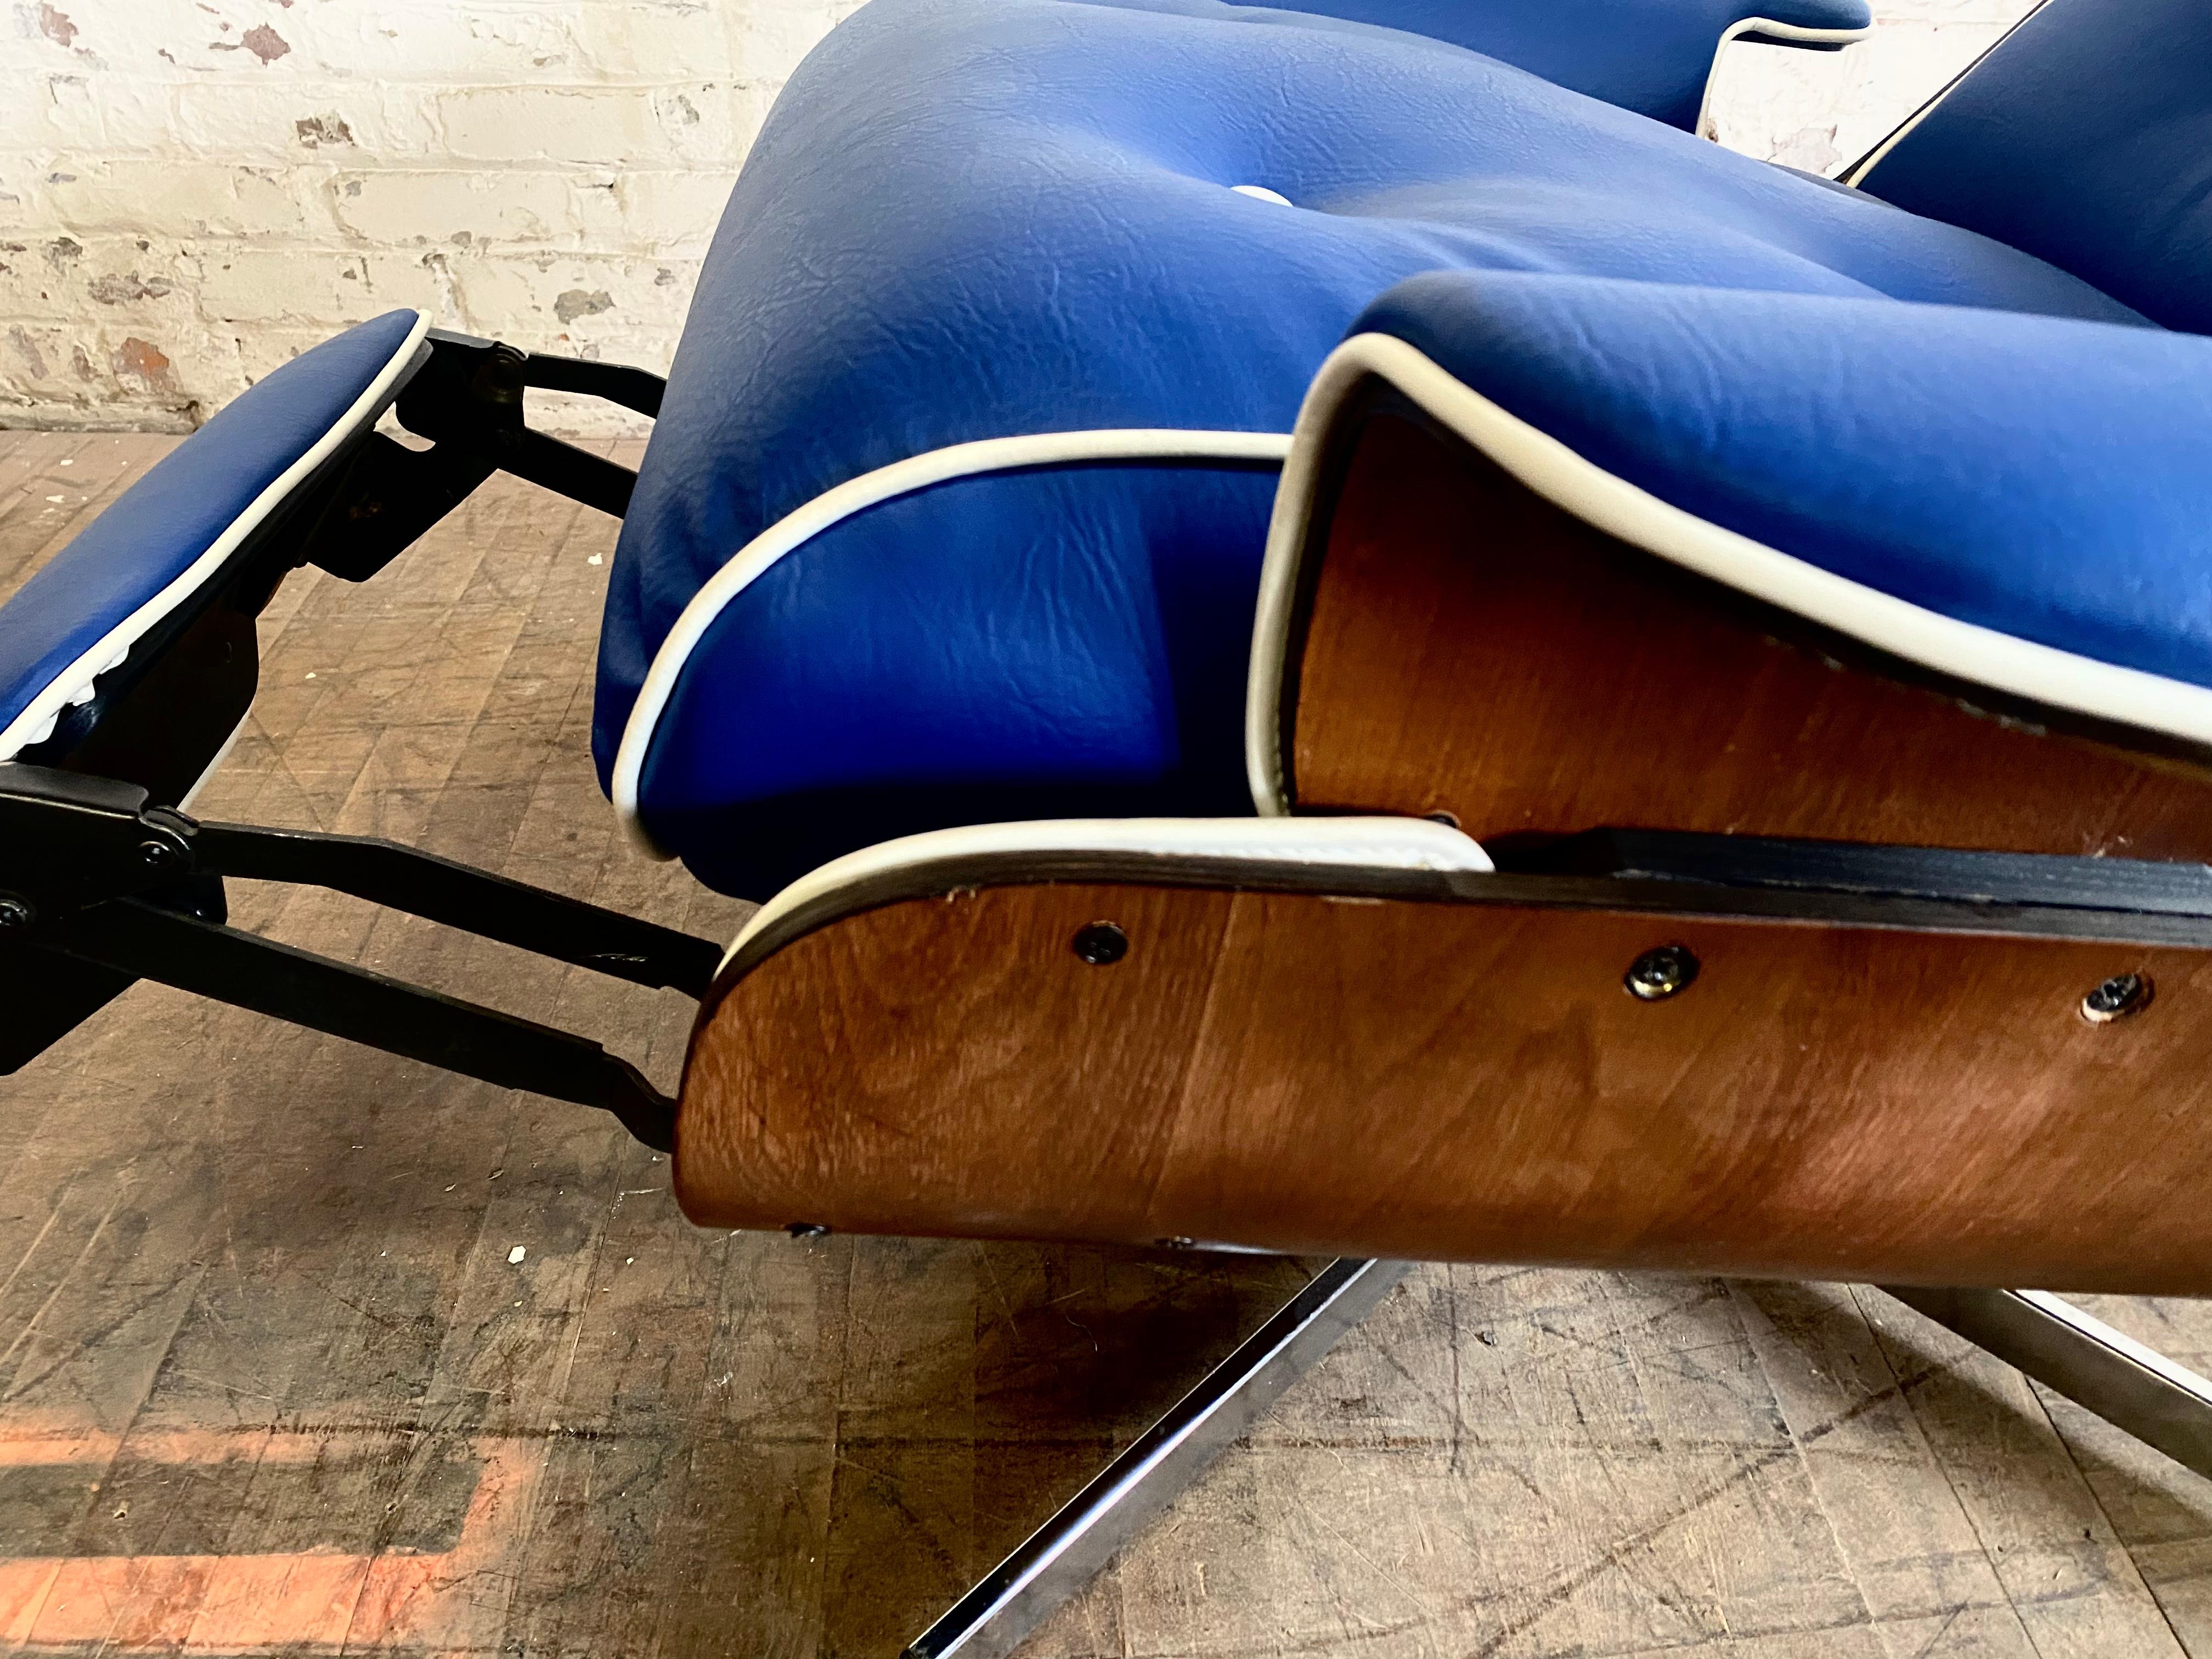 Eames Style lounge chair / recliner, with built in ottoman ', foot rest, made by PLYCRAFT. Beautifully restored, great color, classic Mid-Century Modern Design, extremely comfortable, 3-position recliner, hand delivery avail to new York City or